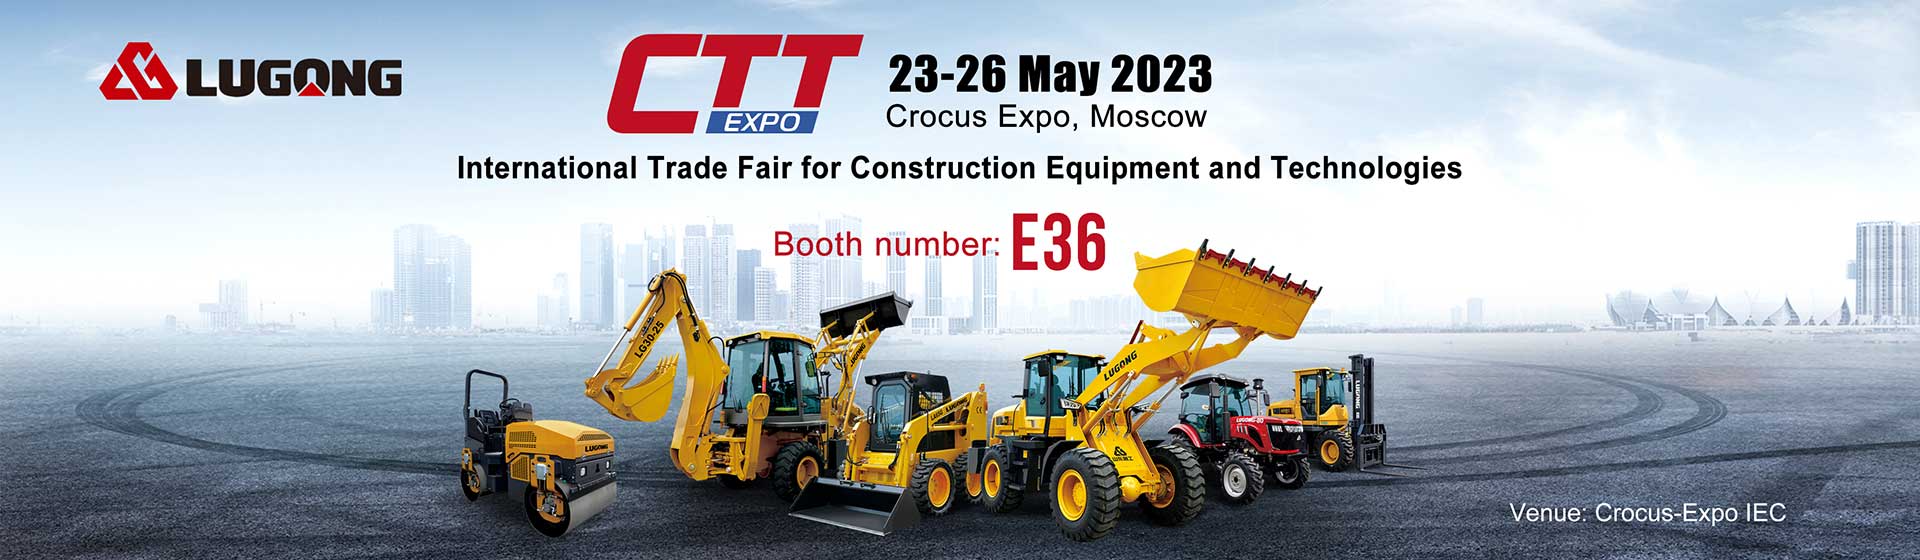 LUGONG will Participate in Russia Exhibition in May